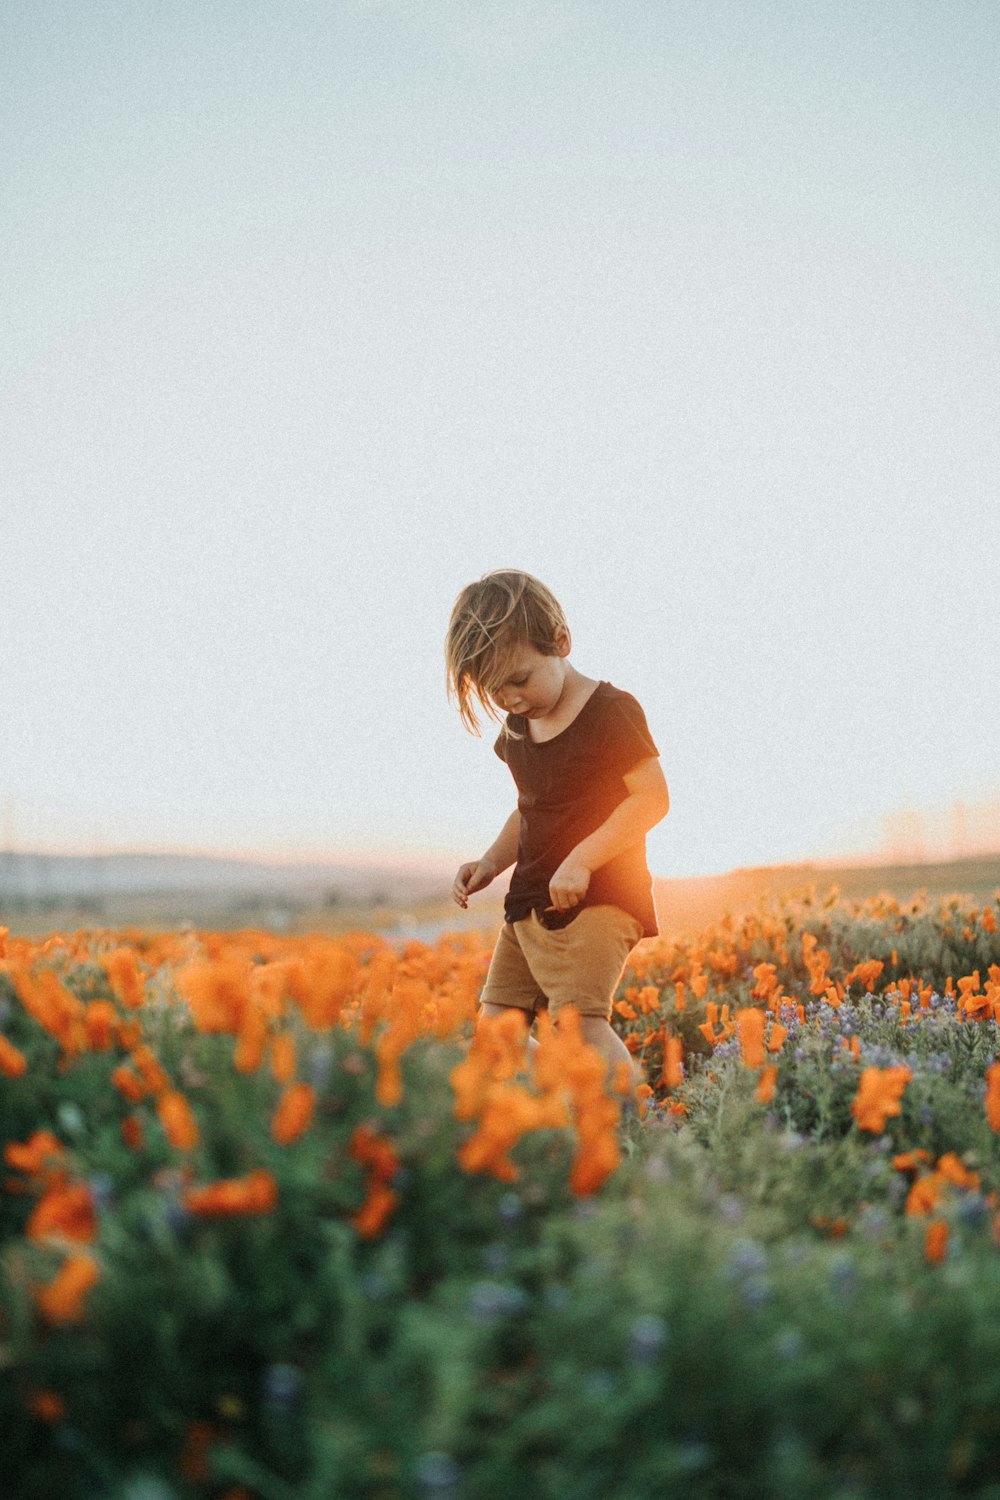 woman in orange long sleeve shirt and brown pants running on flower field during daytime